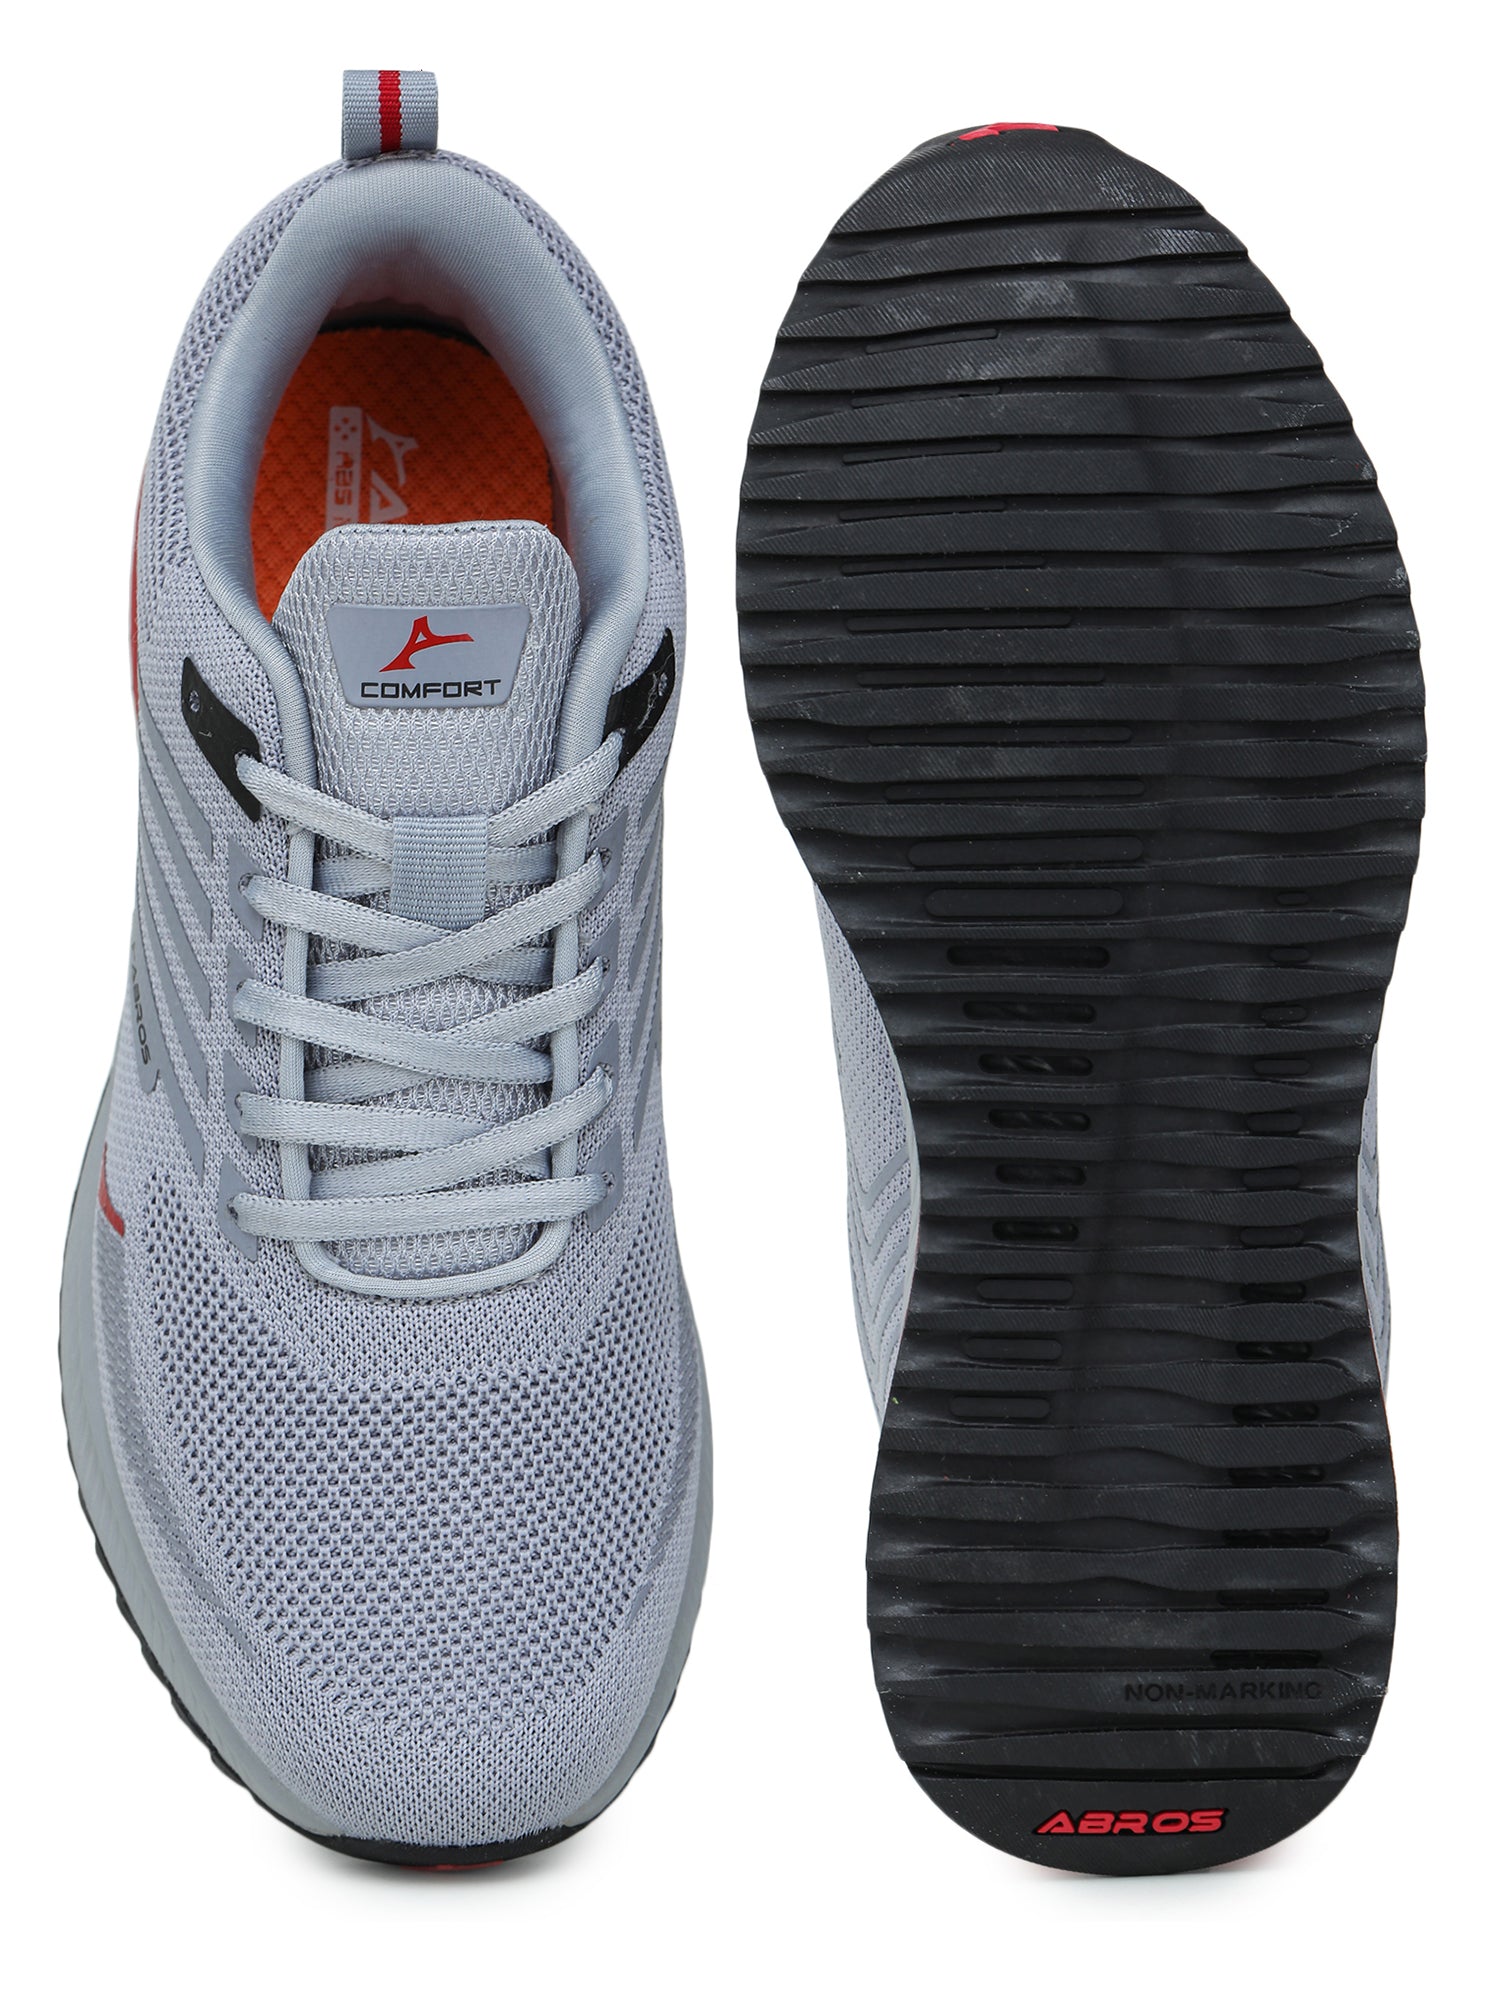 ABROS  NAPOLEON-N RUNNING SPORTS SHOES FOR MEN